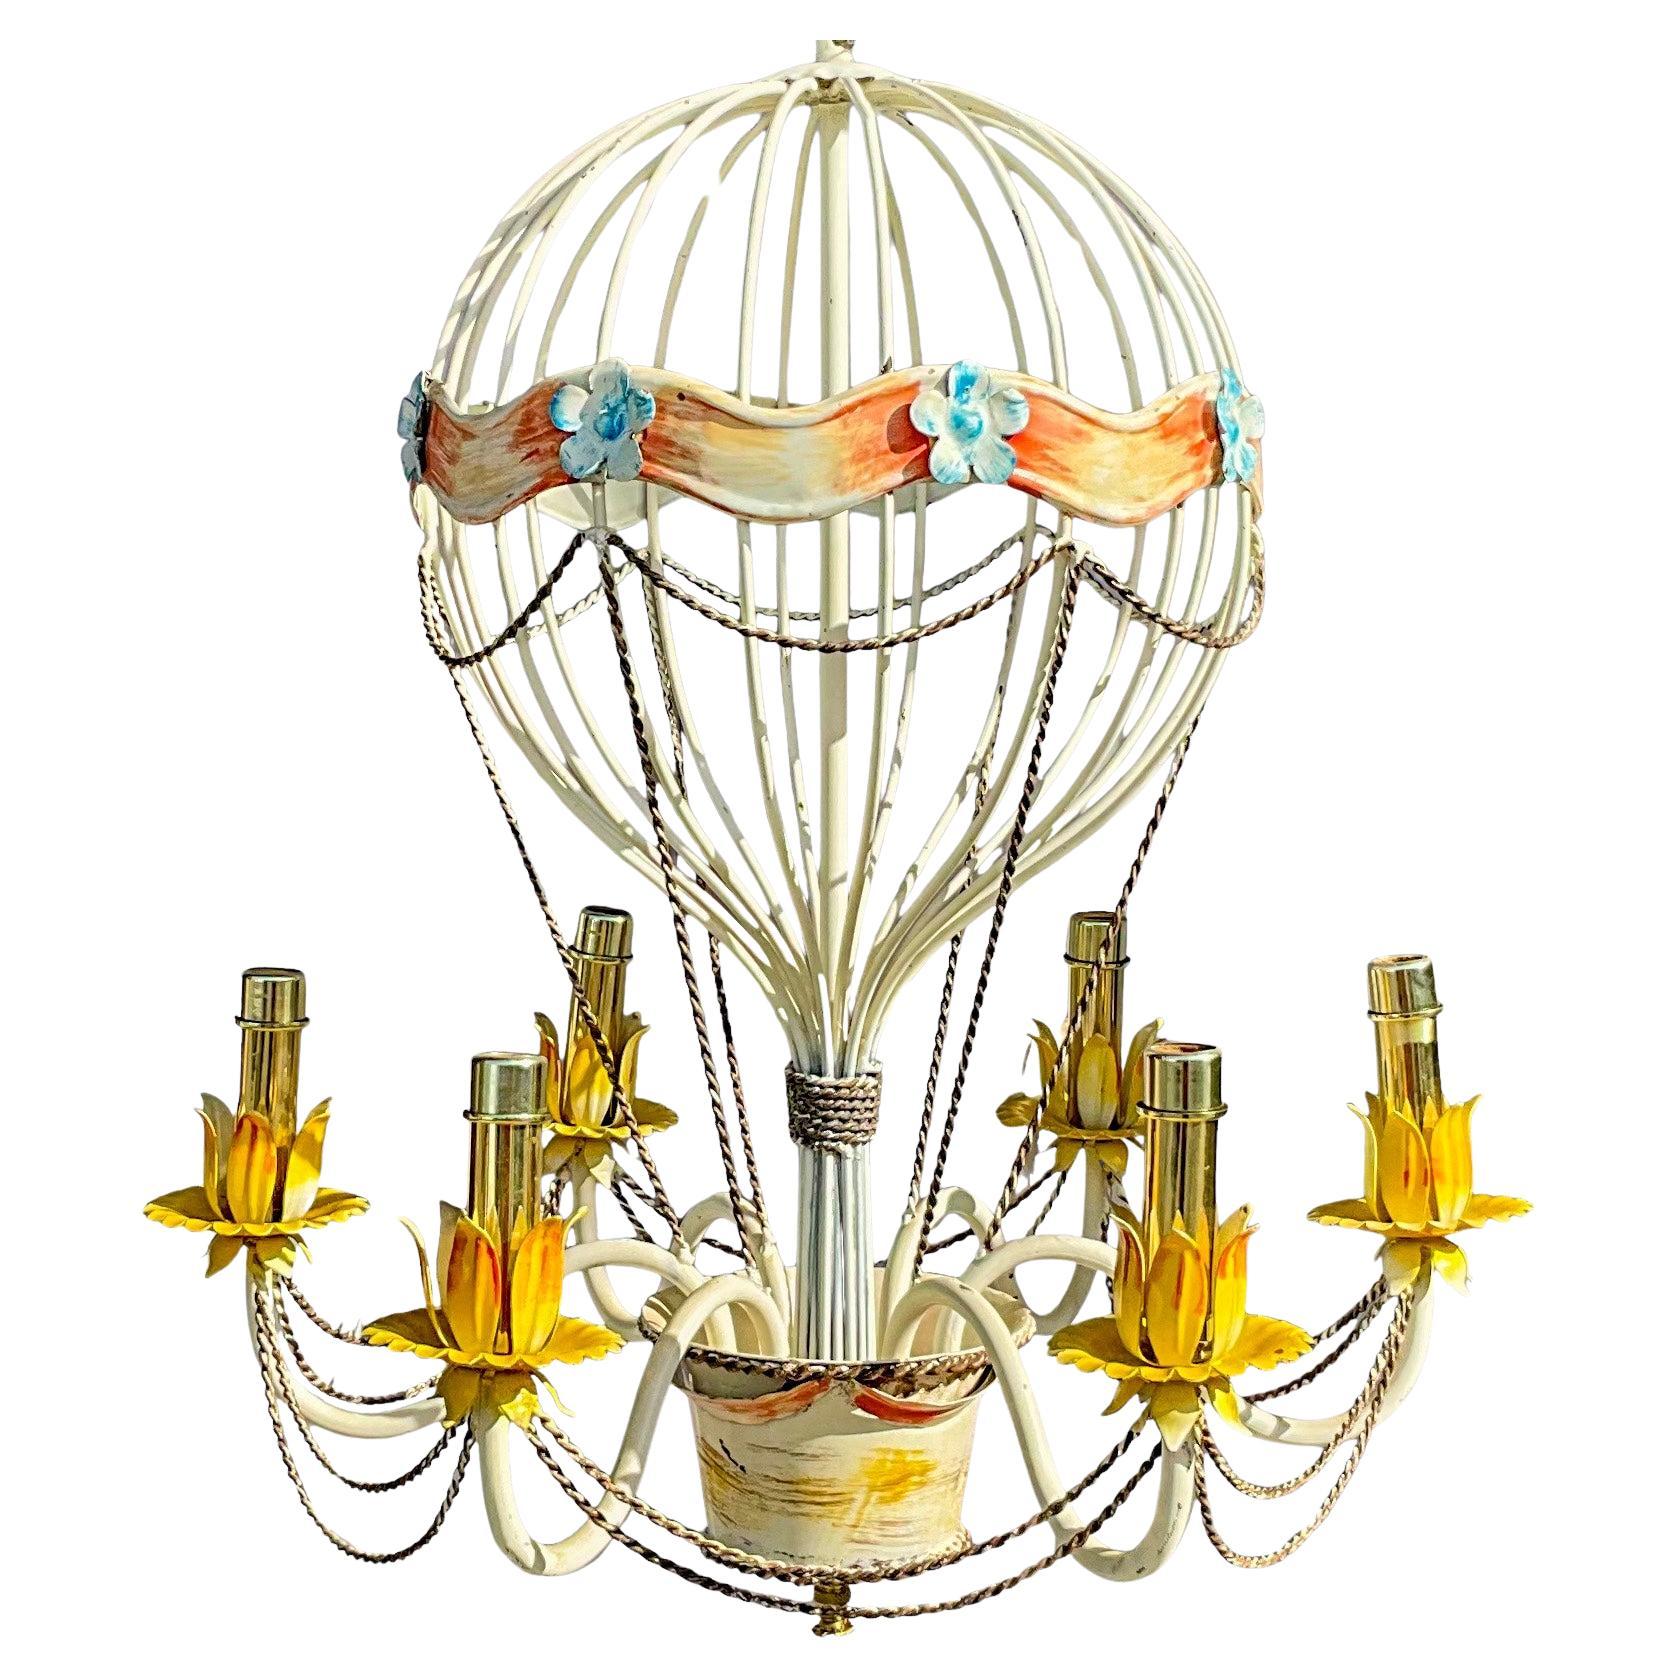 1960s Italian Hot Air Balloon Metal Tole Chandelier W/  French Styling - 6 Arm